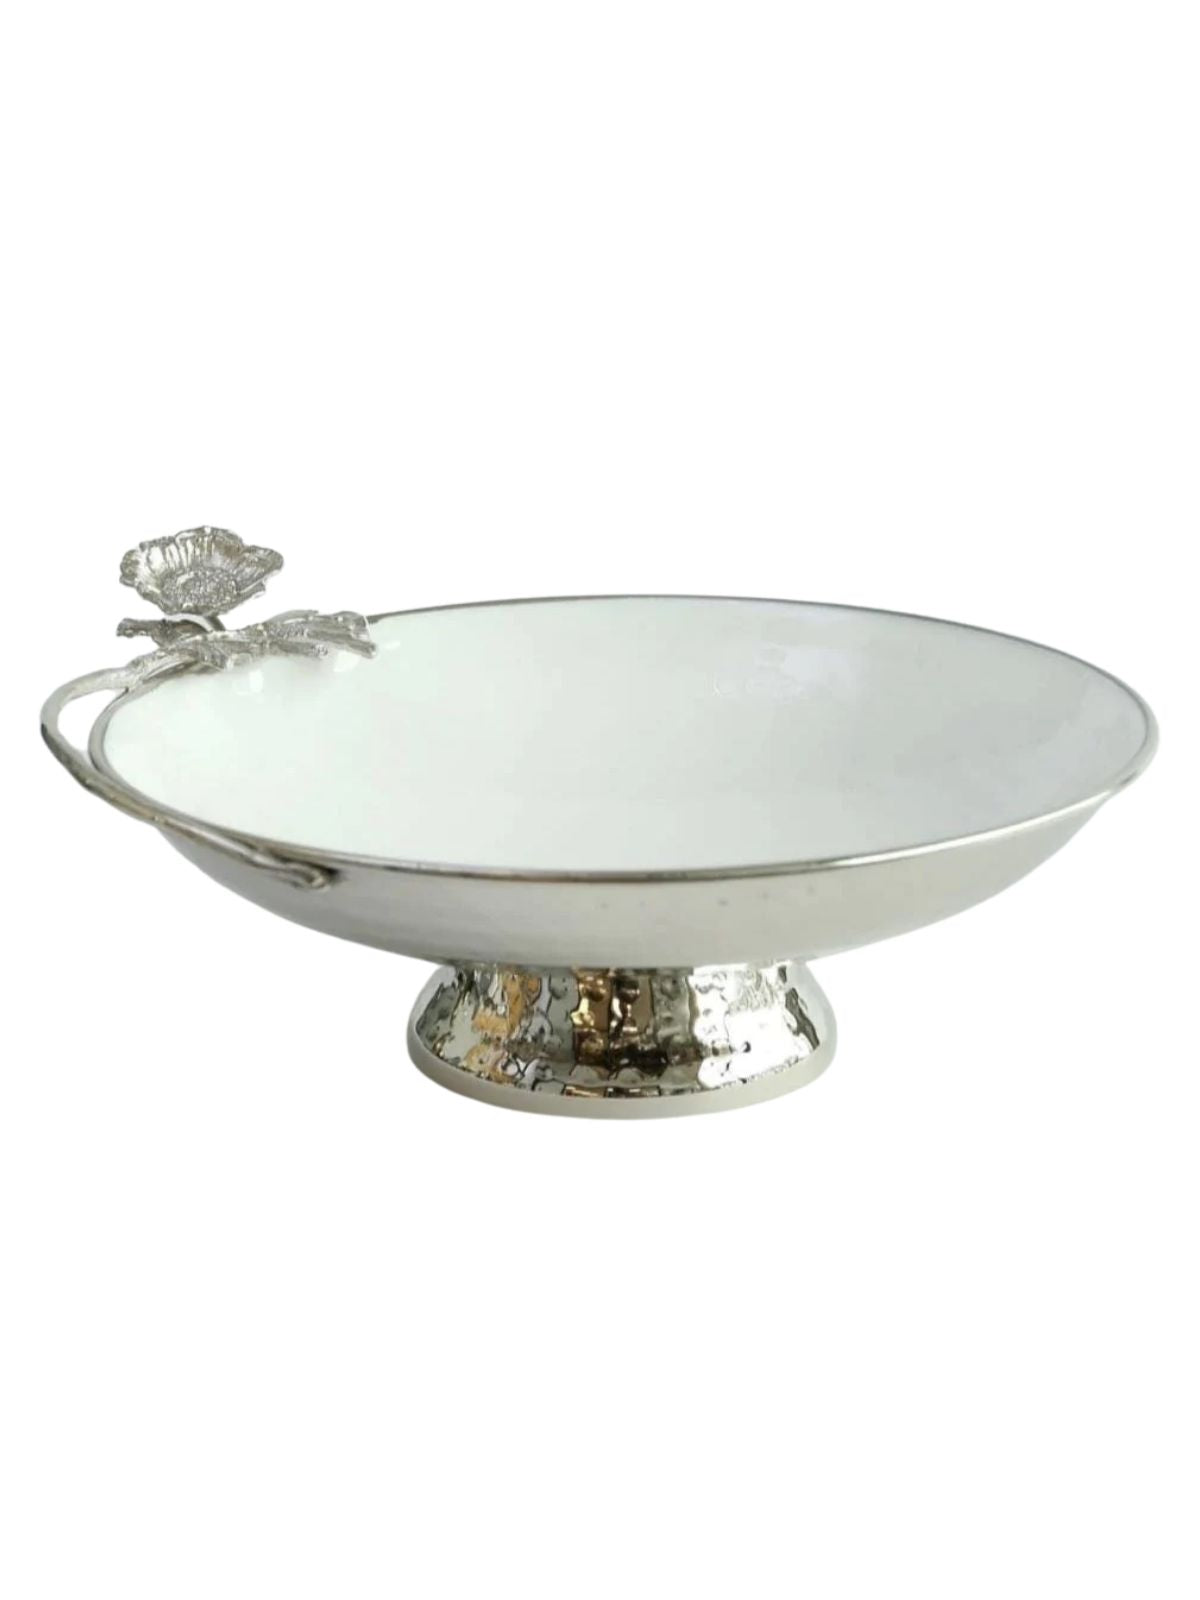 White Bowl with Silver Flower Detail Sold by KYA Home Decor.